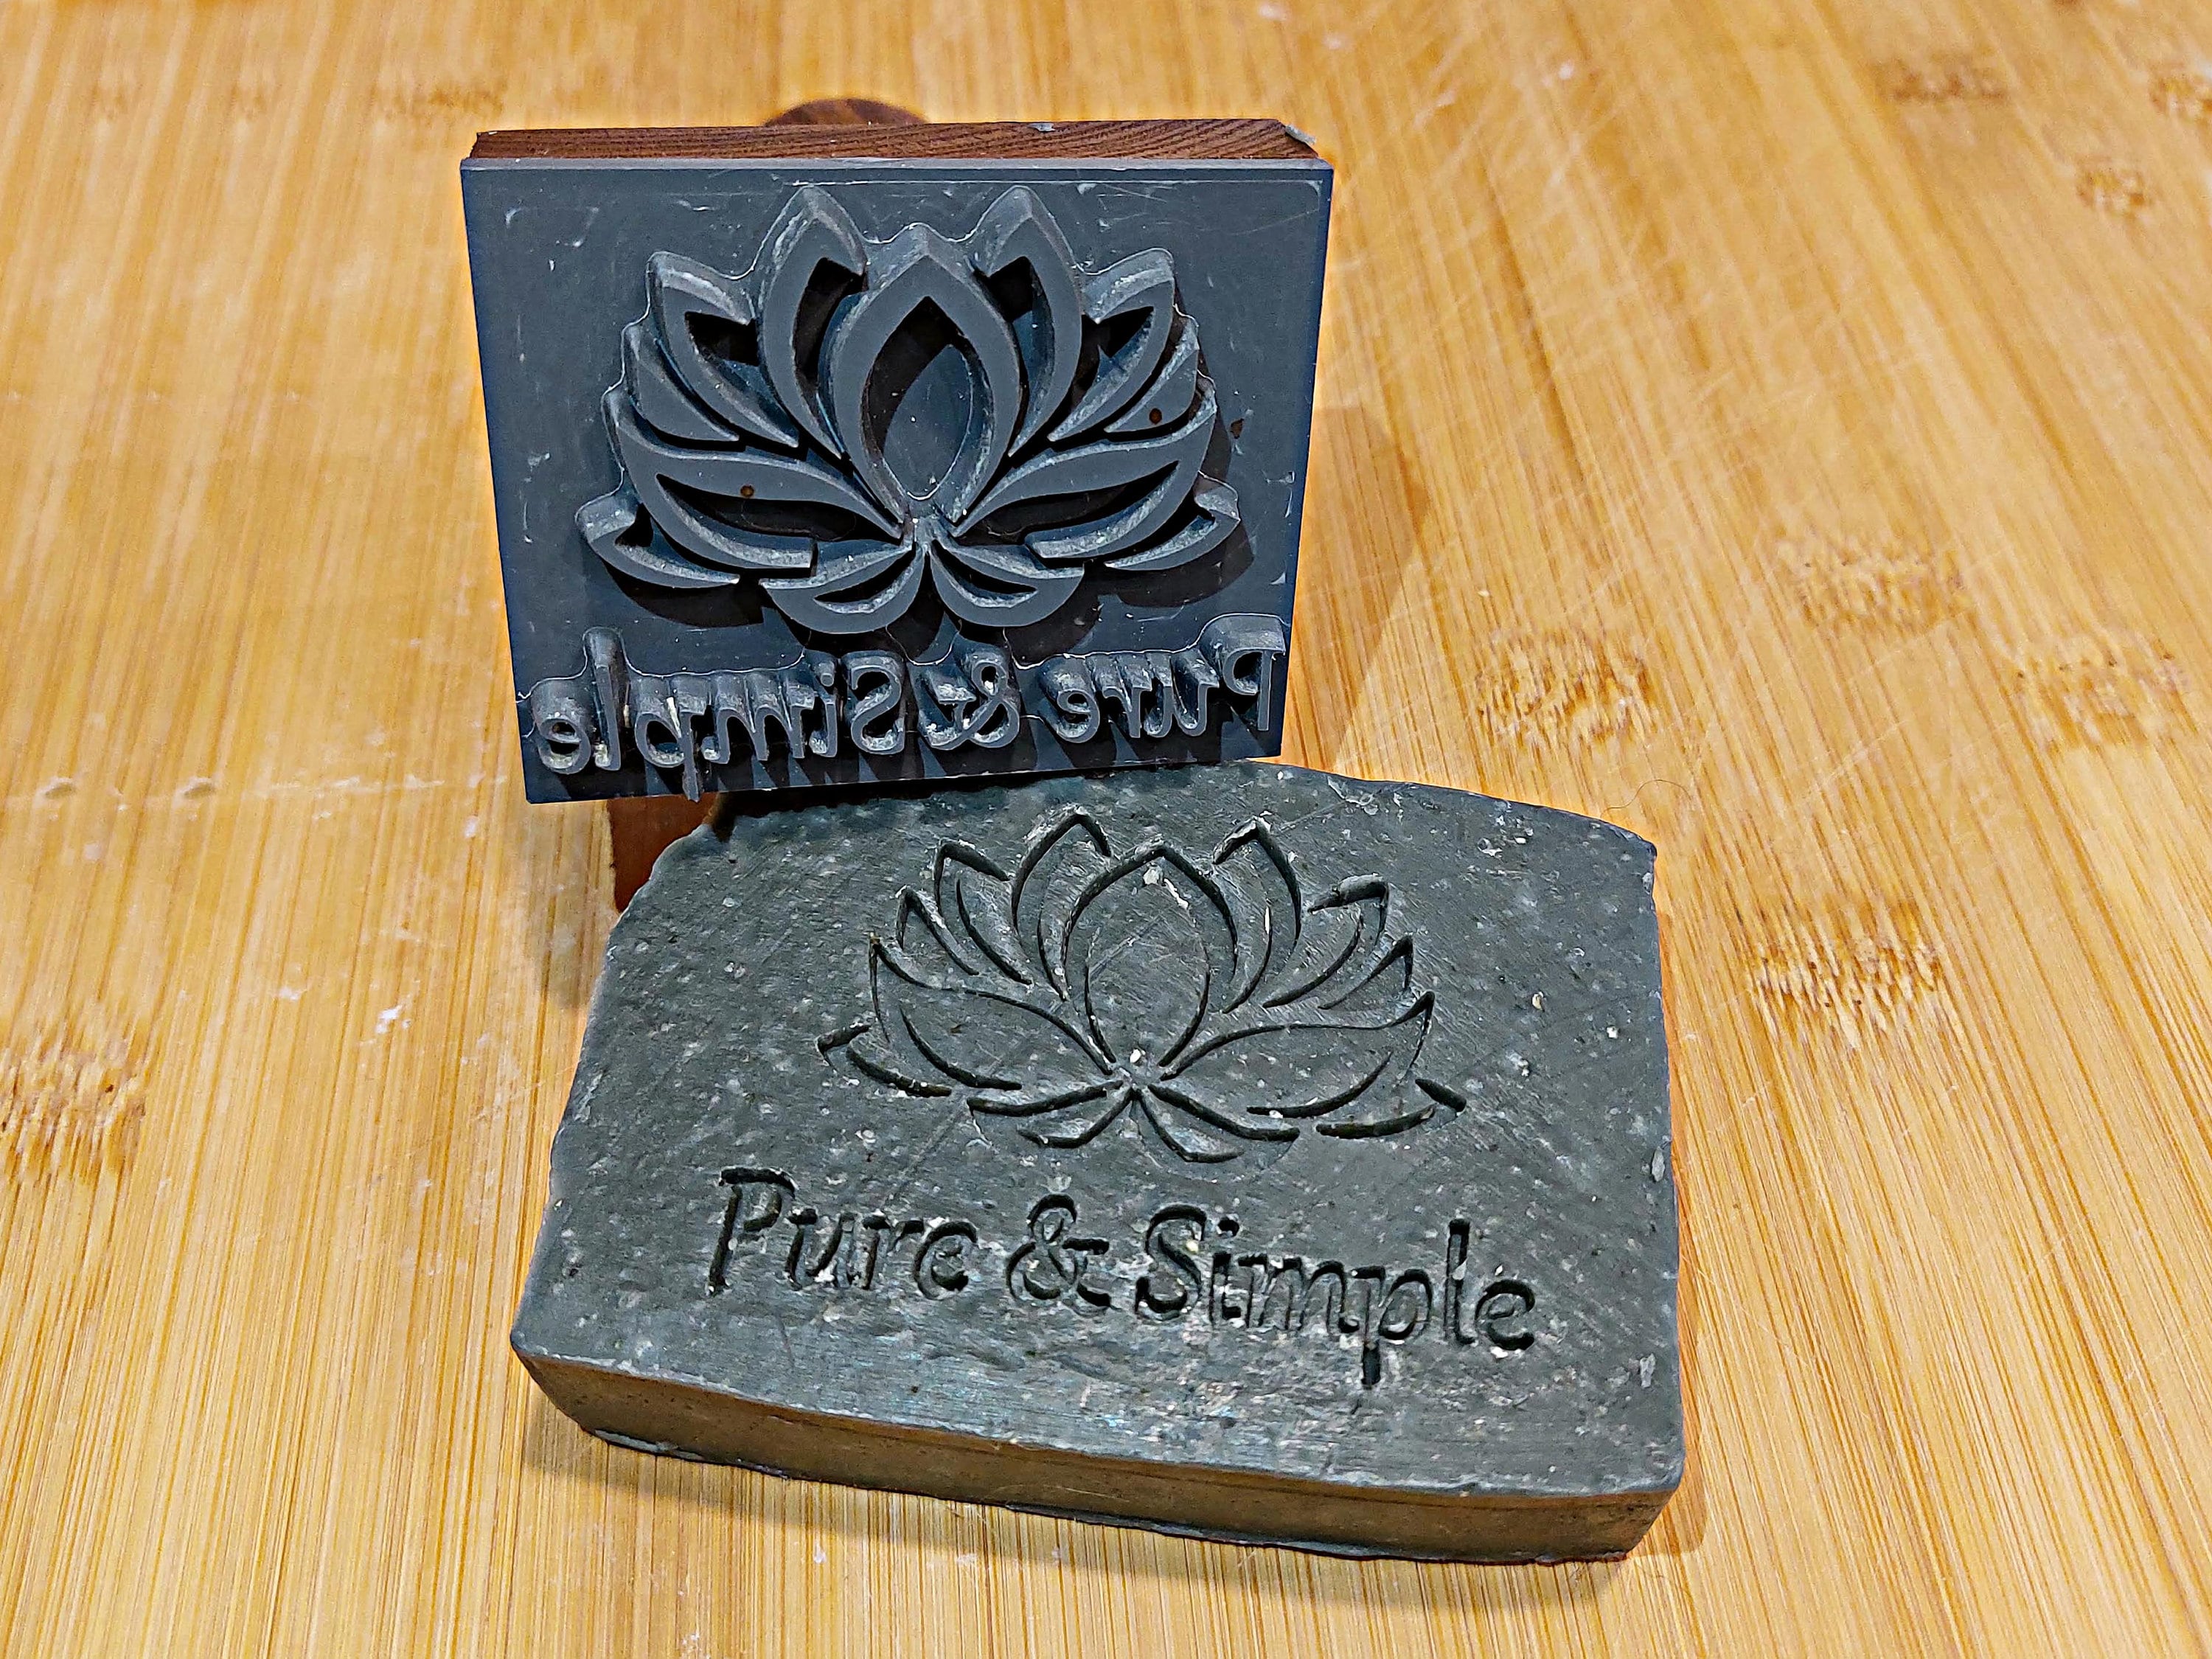 Personalized Soap Stamp to Imprint Custom Logo or Graphic. Crisp